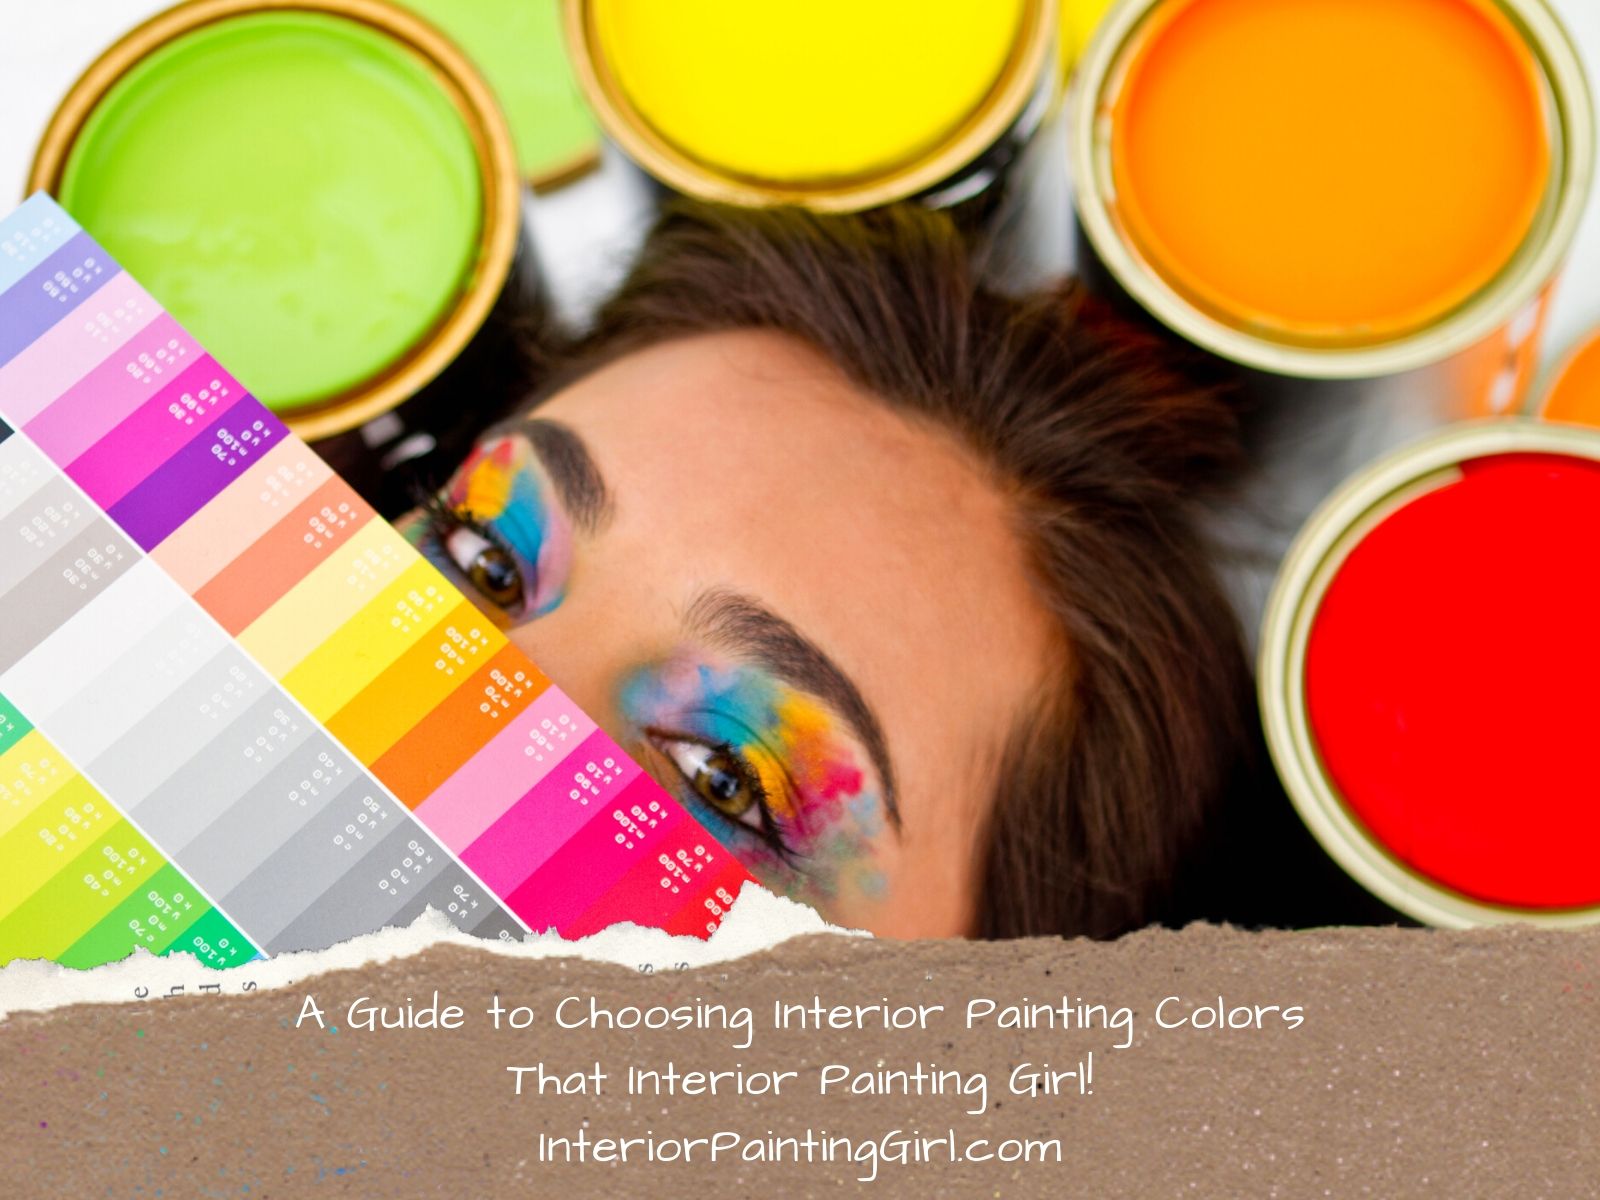 A step-by-step guide to Choosing Interior Paint Colors for YOUR space!